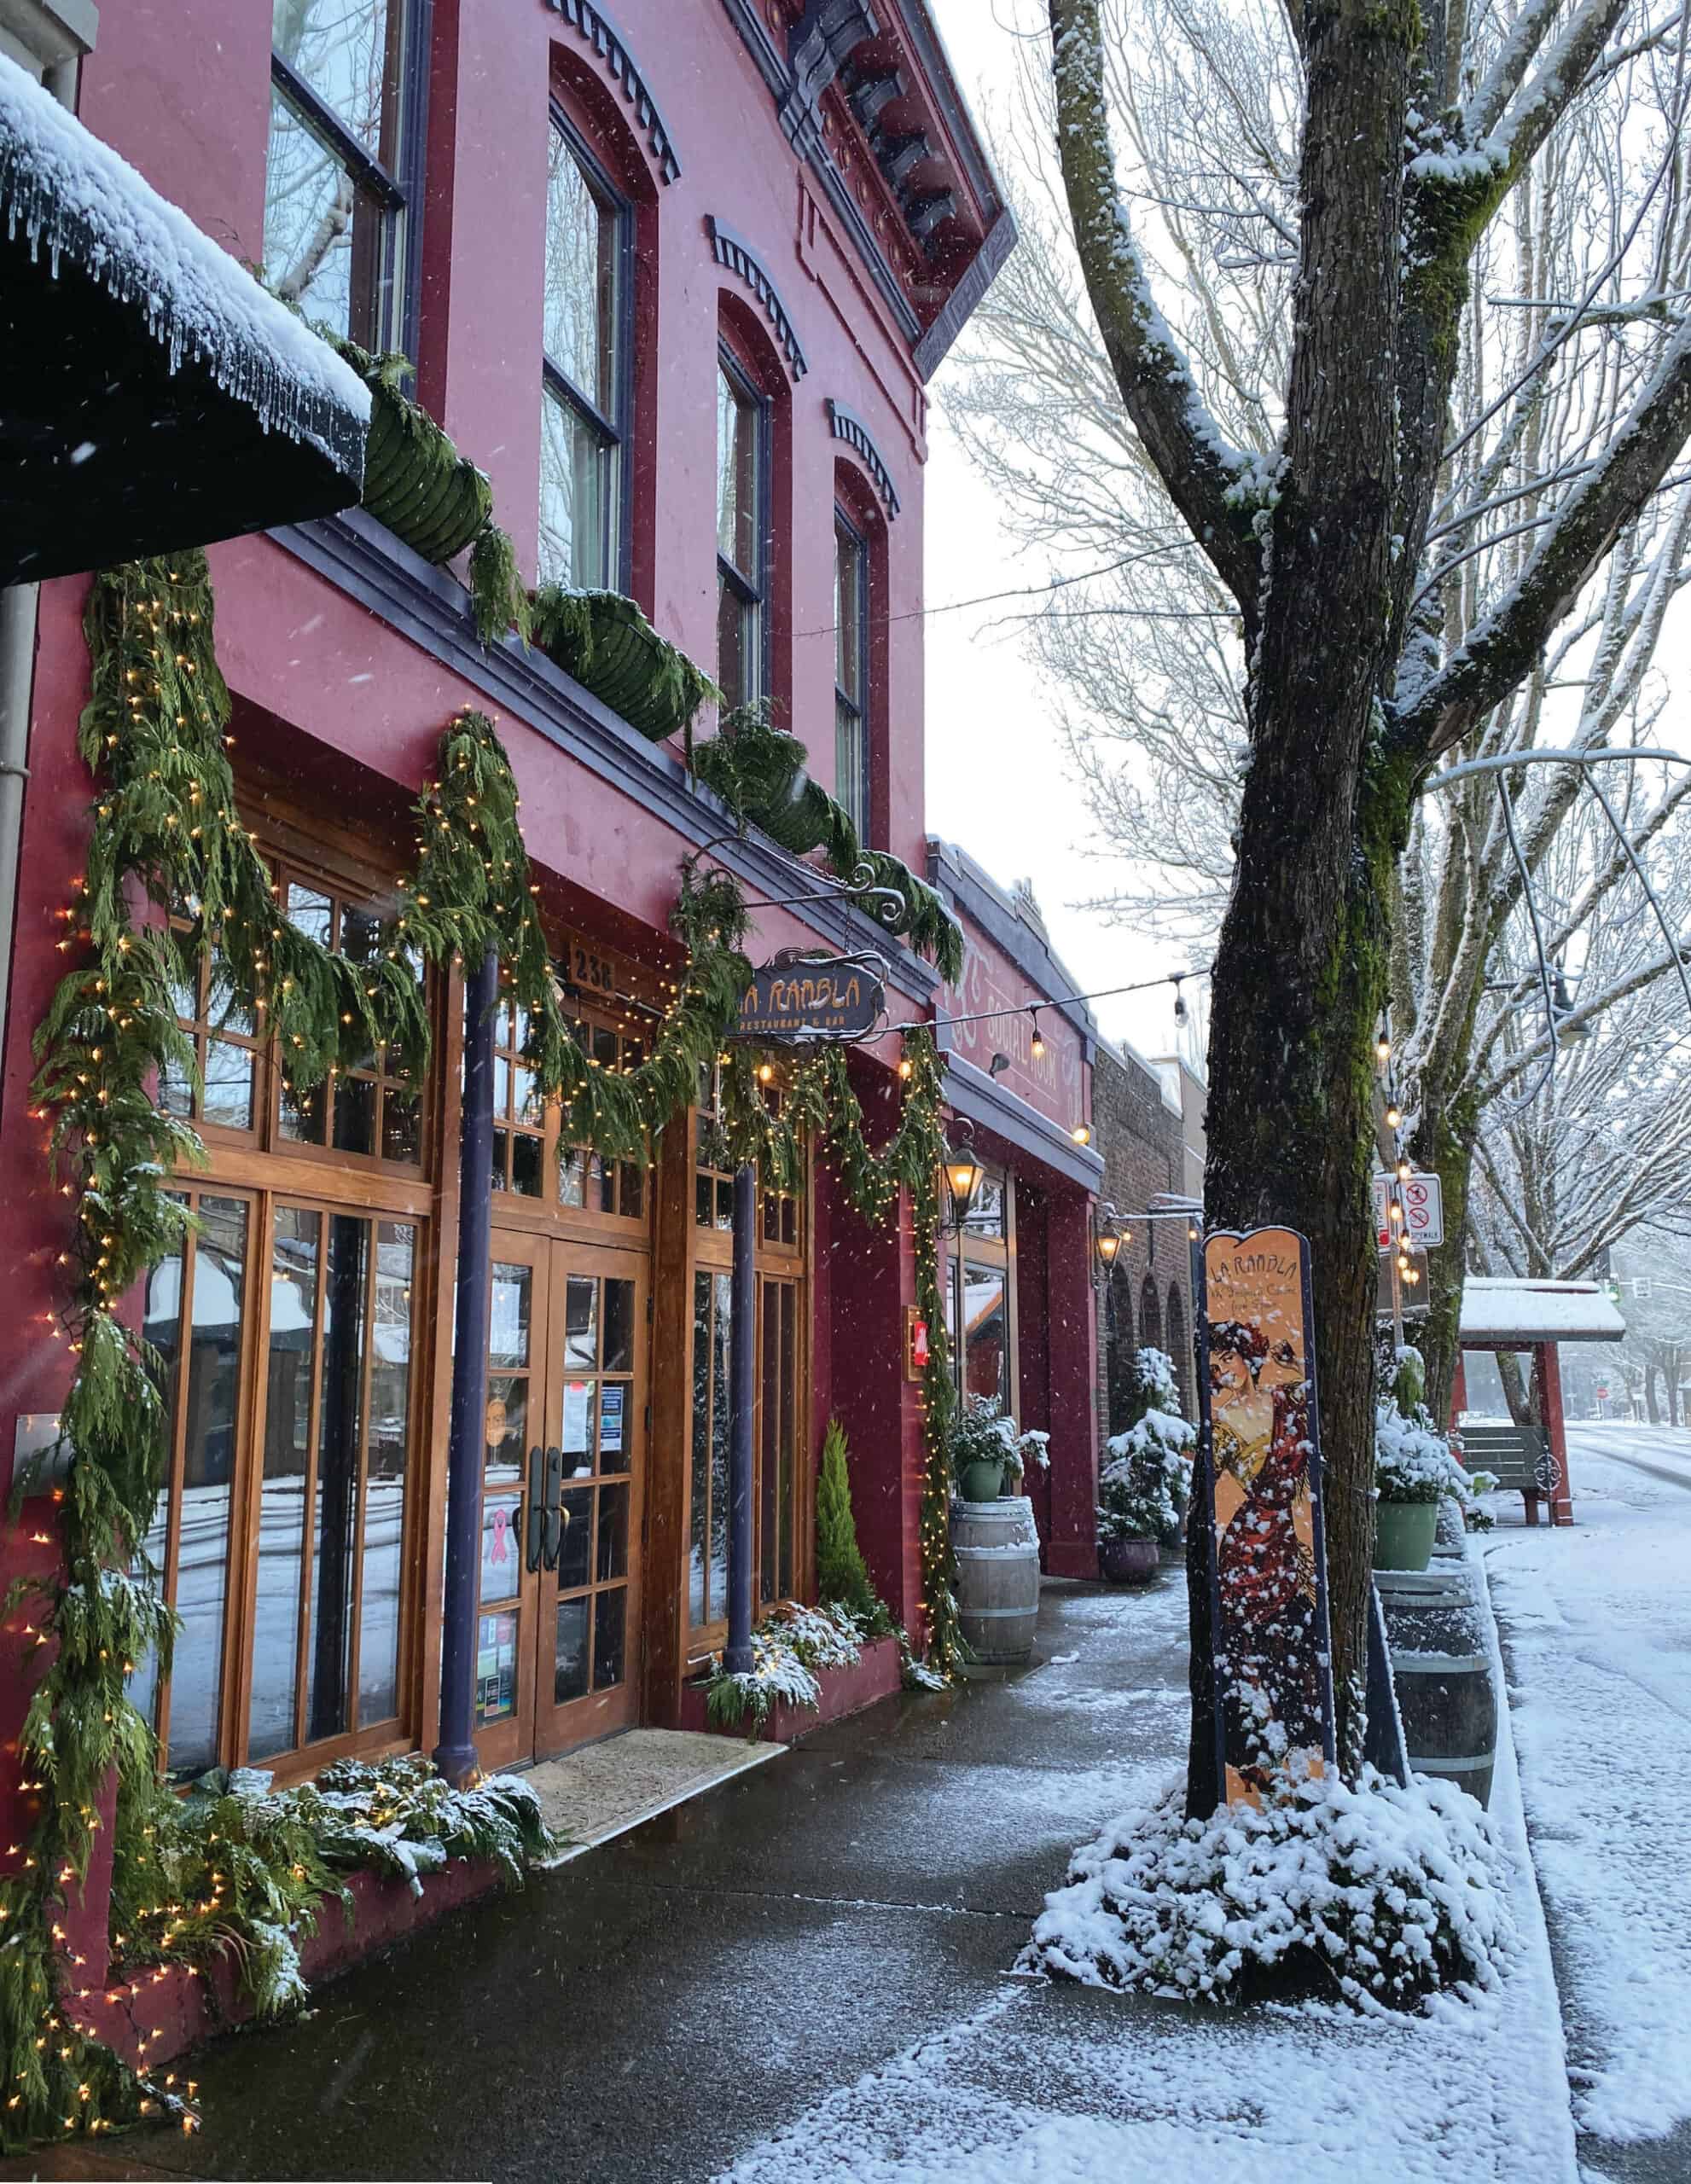 Third Street in McMinnville is the charming Main Street of the town.